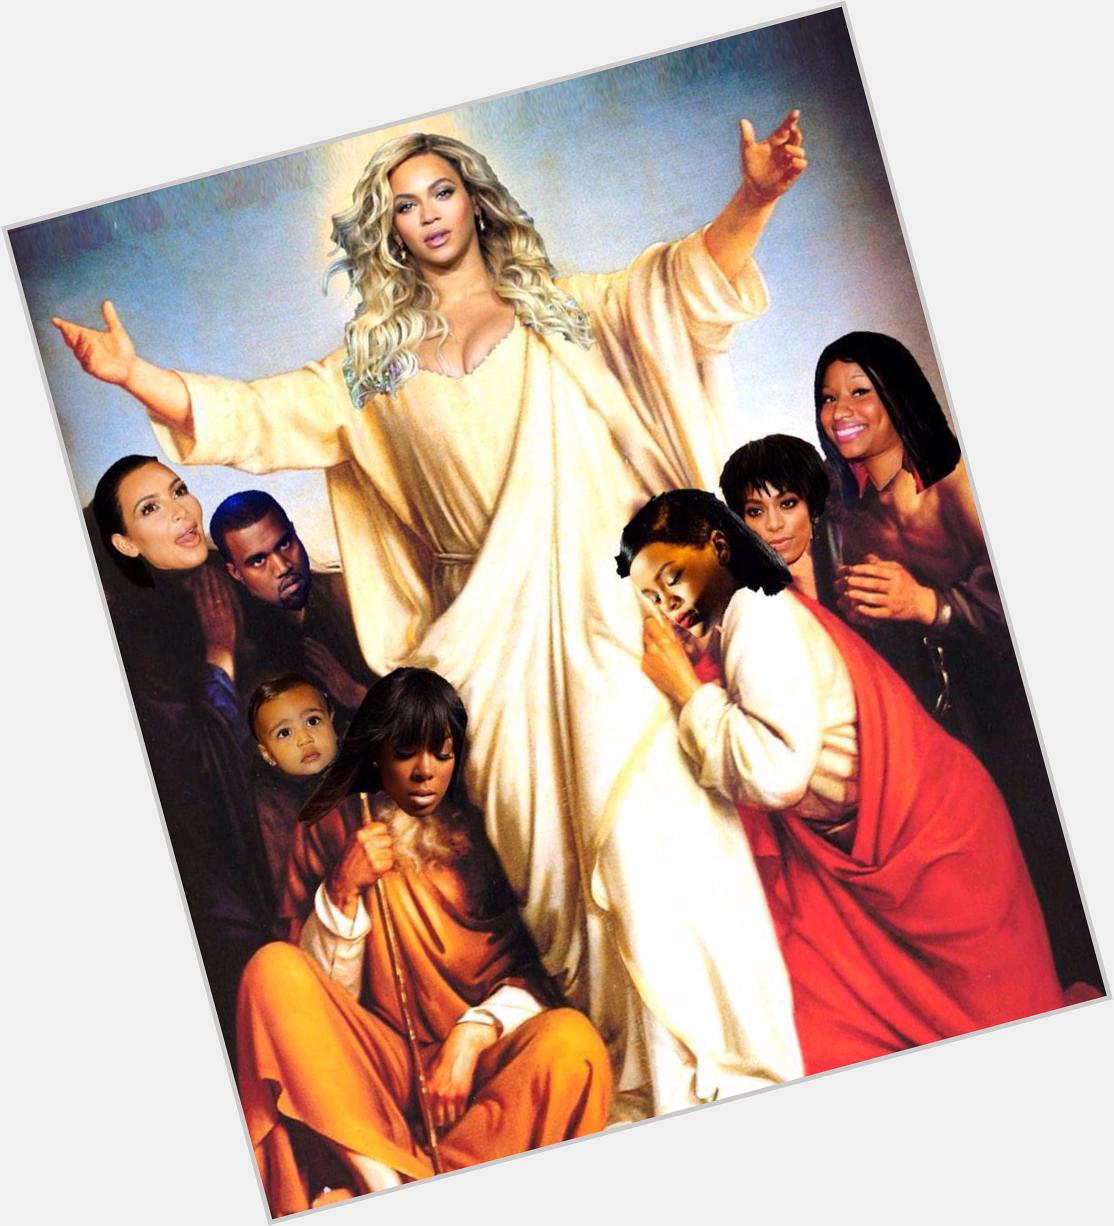 HAPPY BIRTHDAY TO QUEEN OF EVERYTHING AND OUR FEARLESS LEADER BEYONCÉ KNOWLES CARTER.    